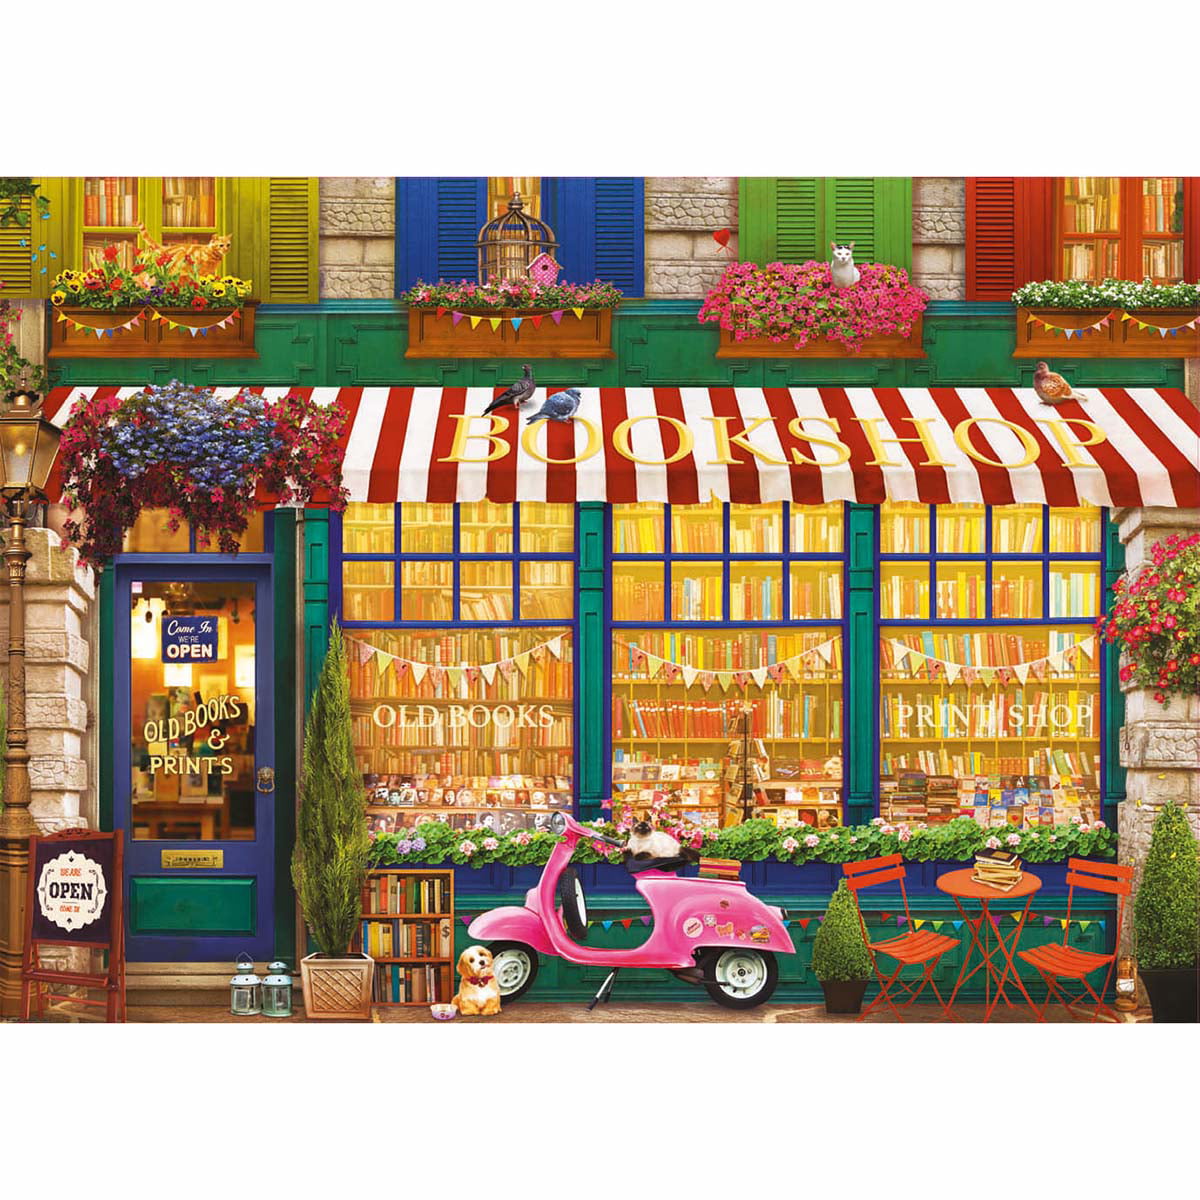 Jigsaw Puzzle 4000 Pieces Jigsaw Puzzle 4000 Pieces Adults Adults' Puzzle Games Teens Kids Ballet Girls 